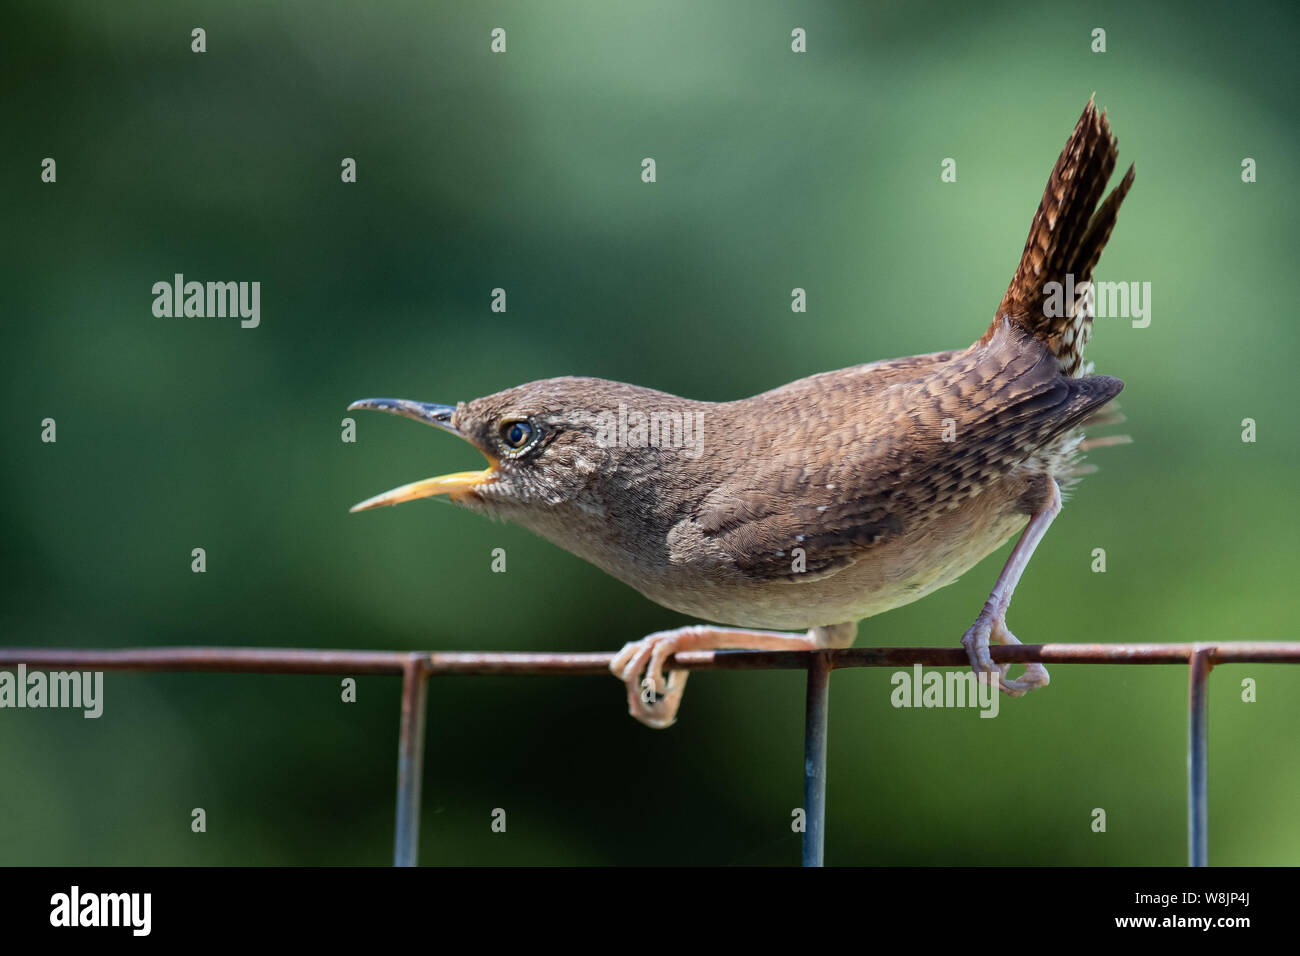 An angry house wren sitting on a wire fence scolding another bird in Speculator, NY USA Stock Photo